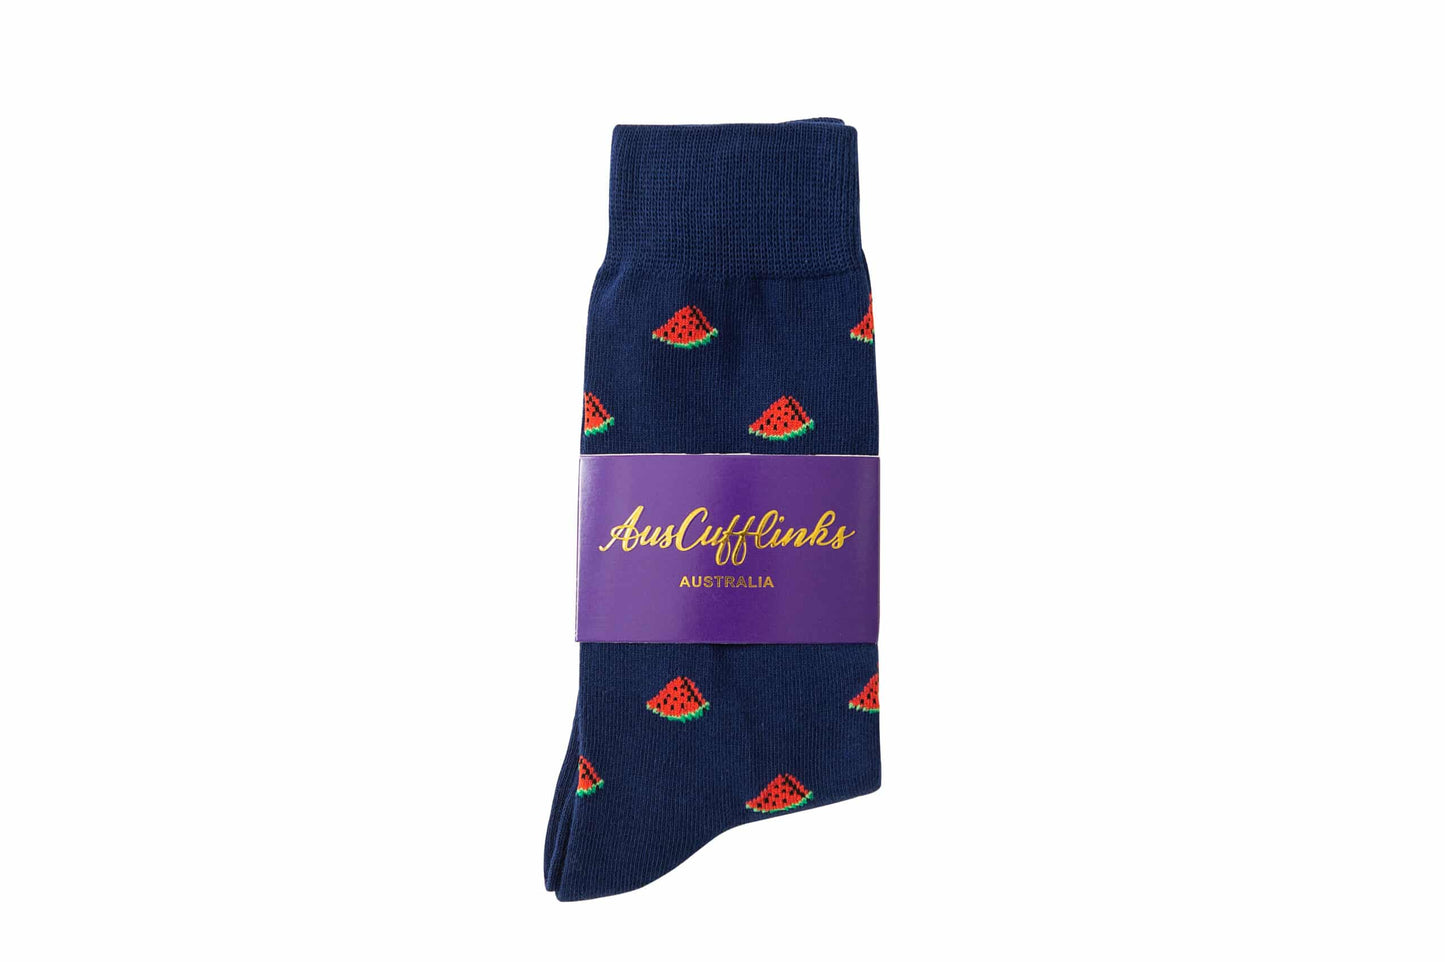 A pair of Watermelon Socks featuring a pattern of juicy red watermelon slices, packaged with a purple label that reads "AusCufflinks Australia.